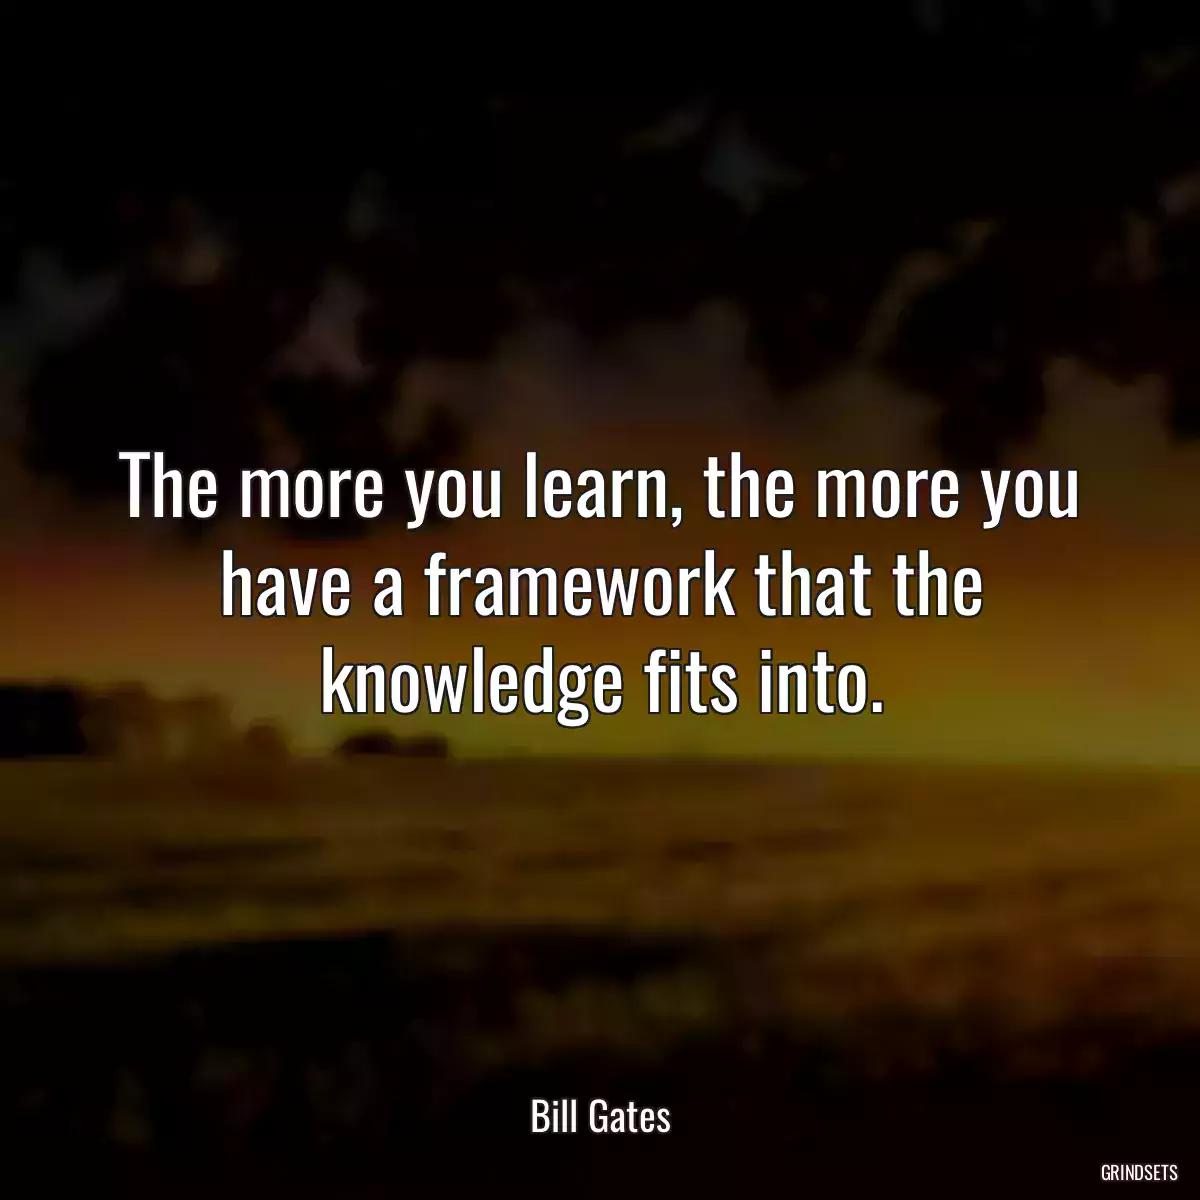 The more you learn, the more you have a framework that the knowledge fits into.